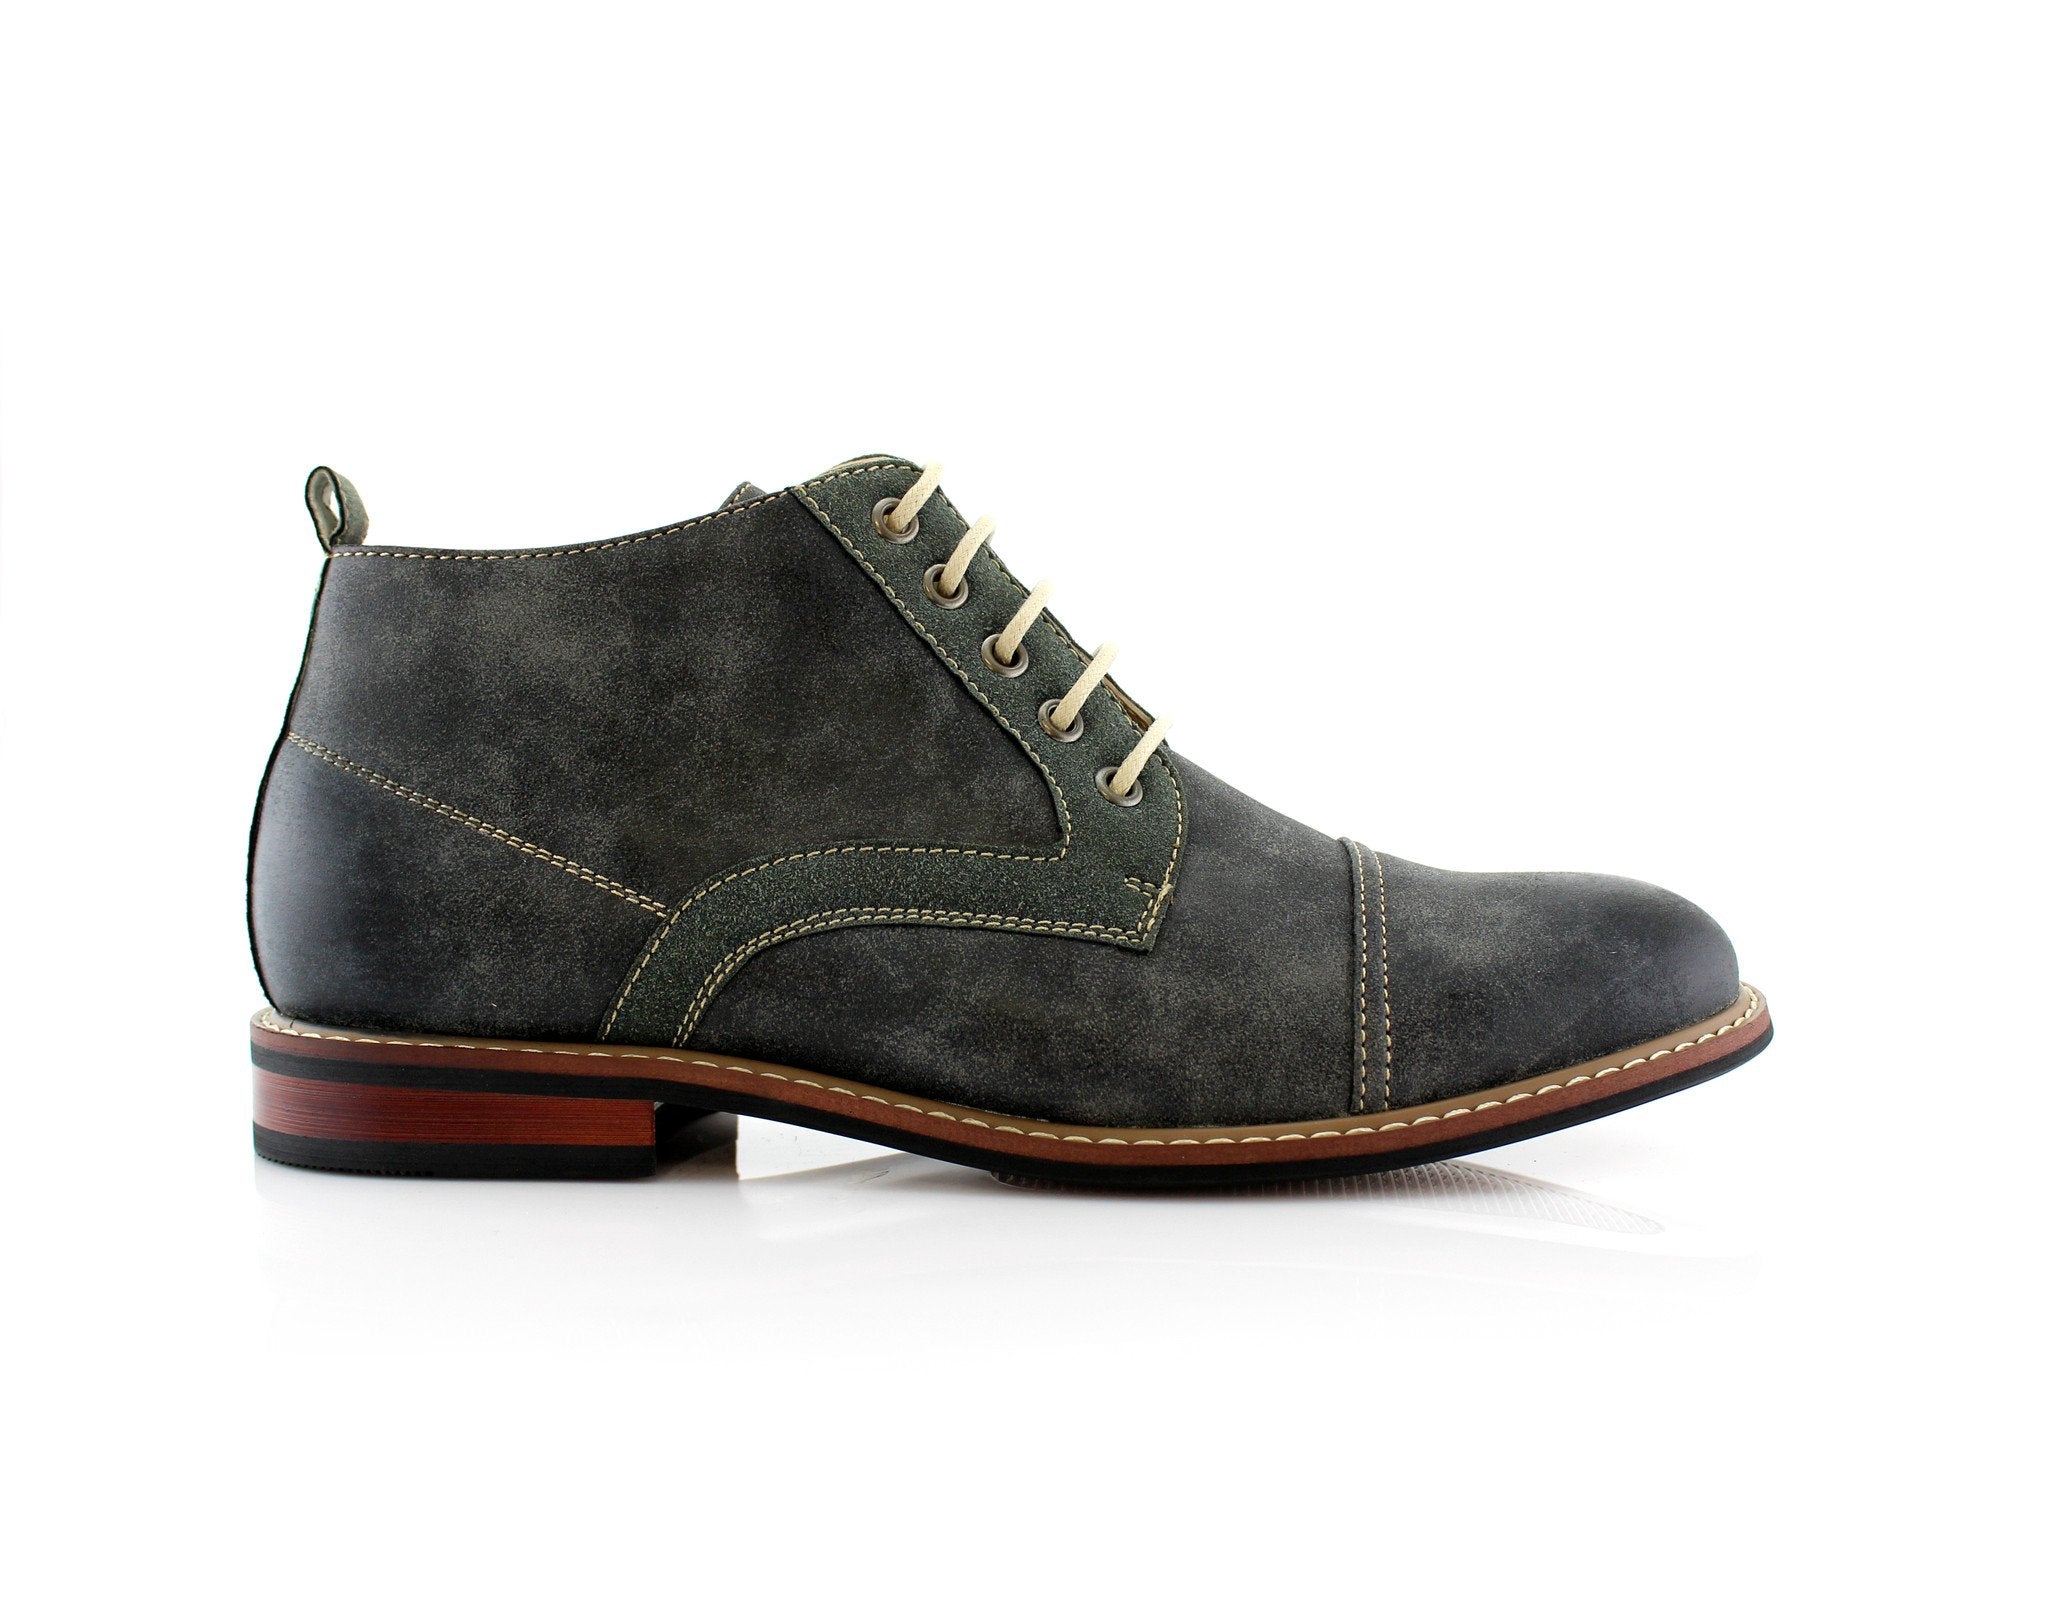 Duo-Textured Ankle Derby Boots | Eli by Ferro Aldo | Conal Footwear | Outer Side Angle View